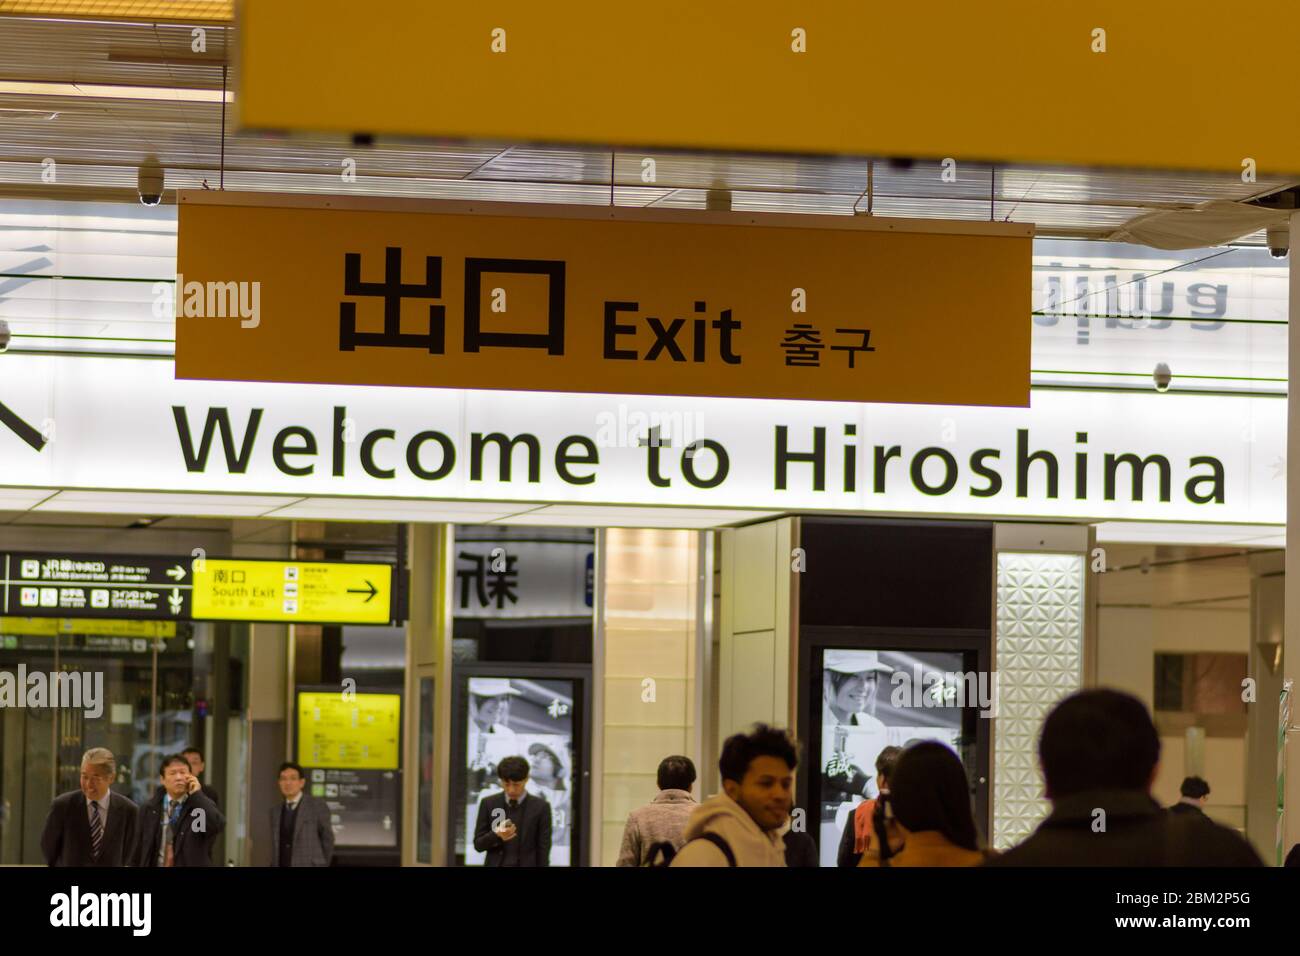 Hiroshima / Japan - December 20 2017: Exit from the Hiroshima Station, railway station in Hiroshima, Japan, operated by JR West Company, with Welcome Stock Photo